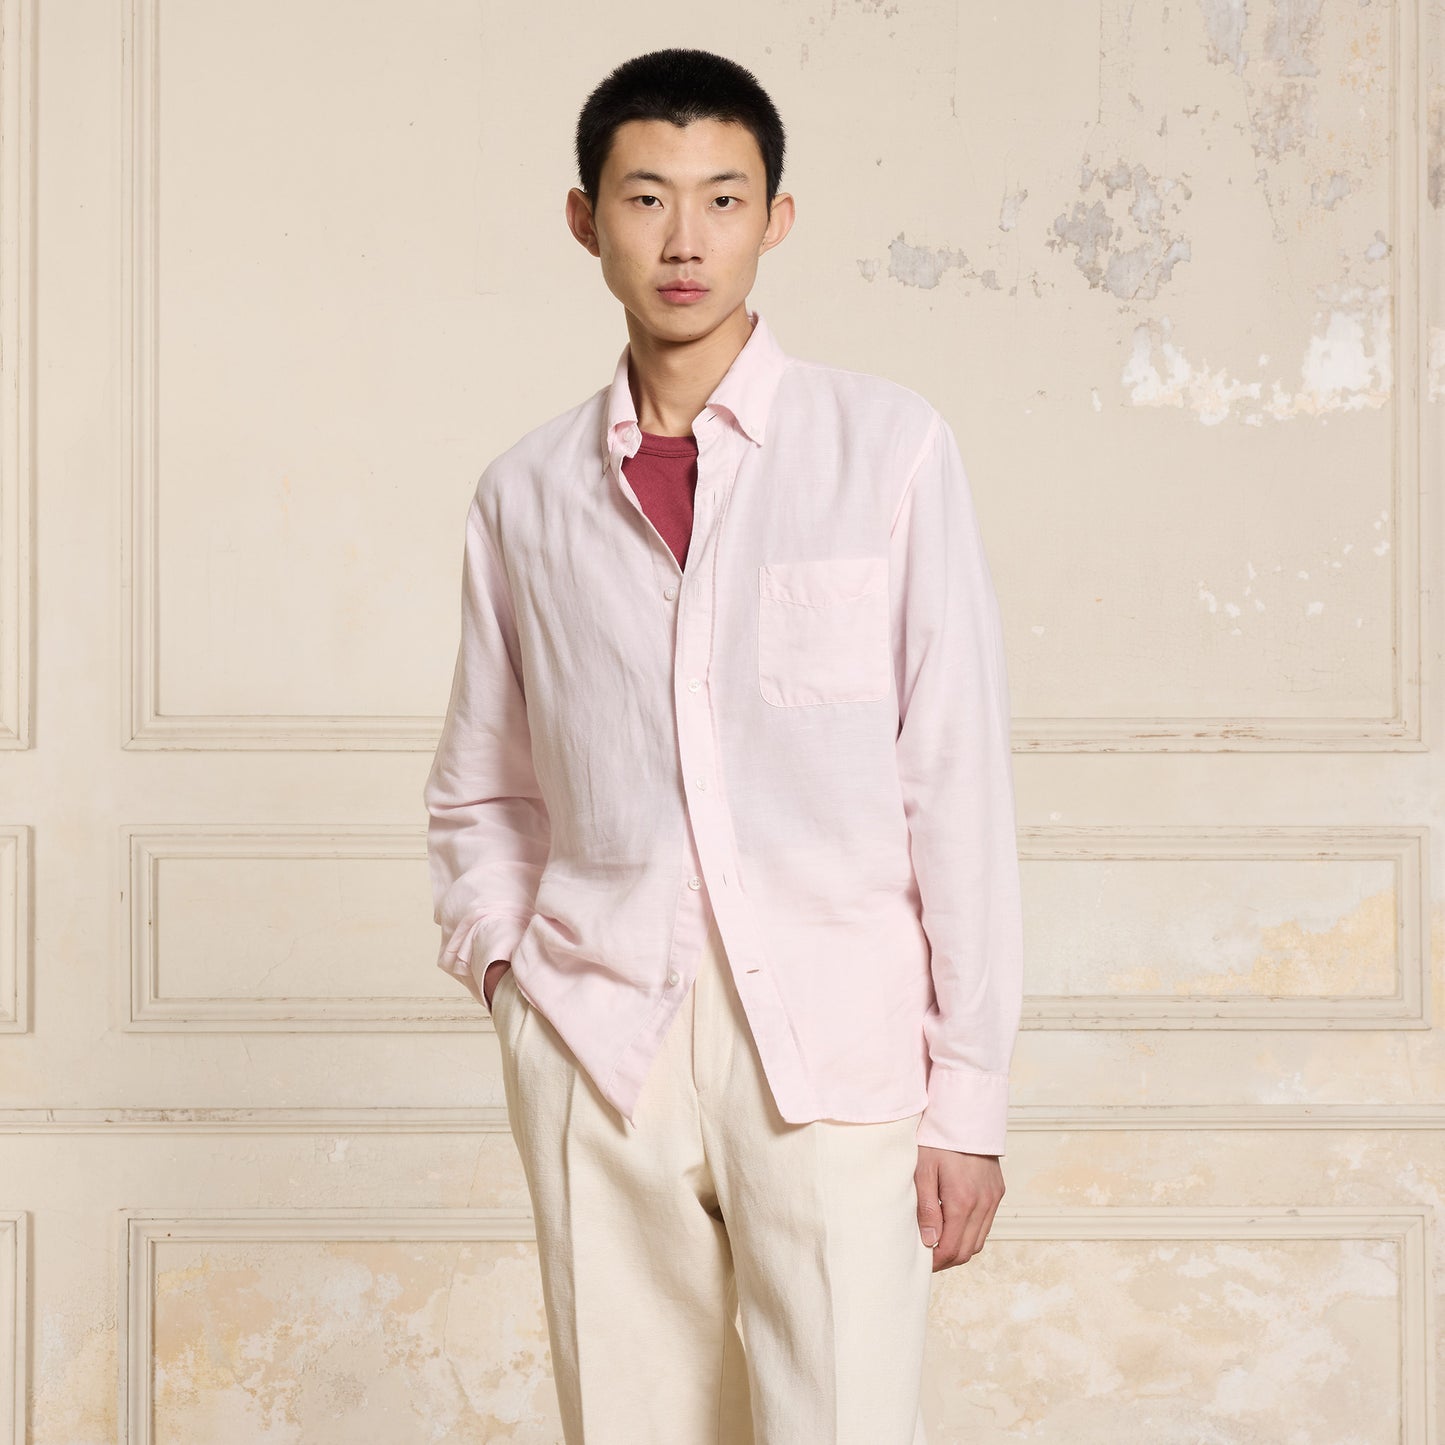 Pale pink linen and cotton shirt